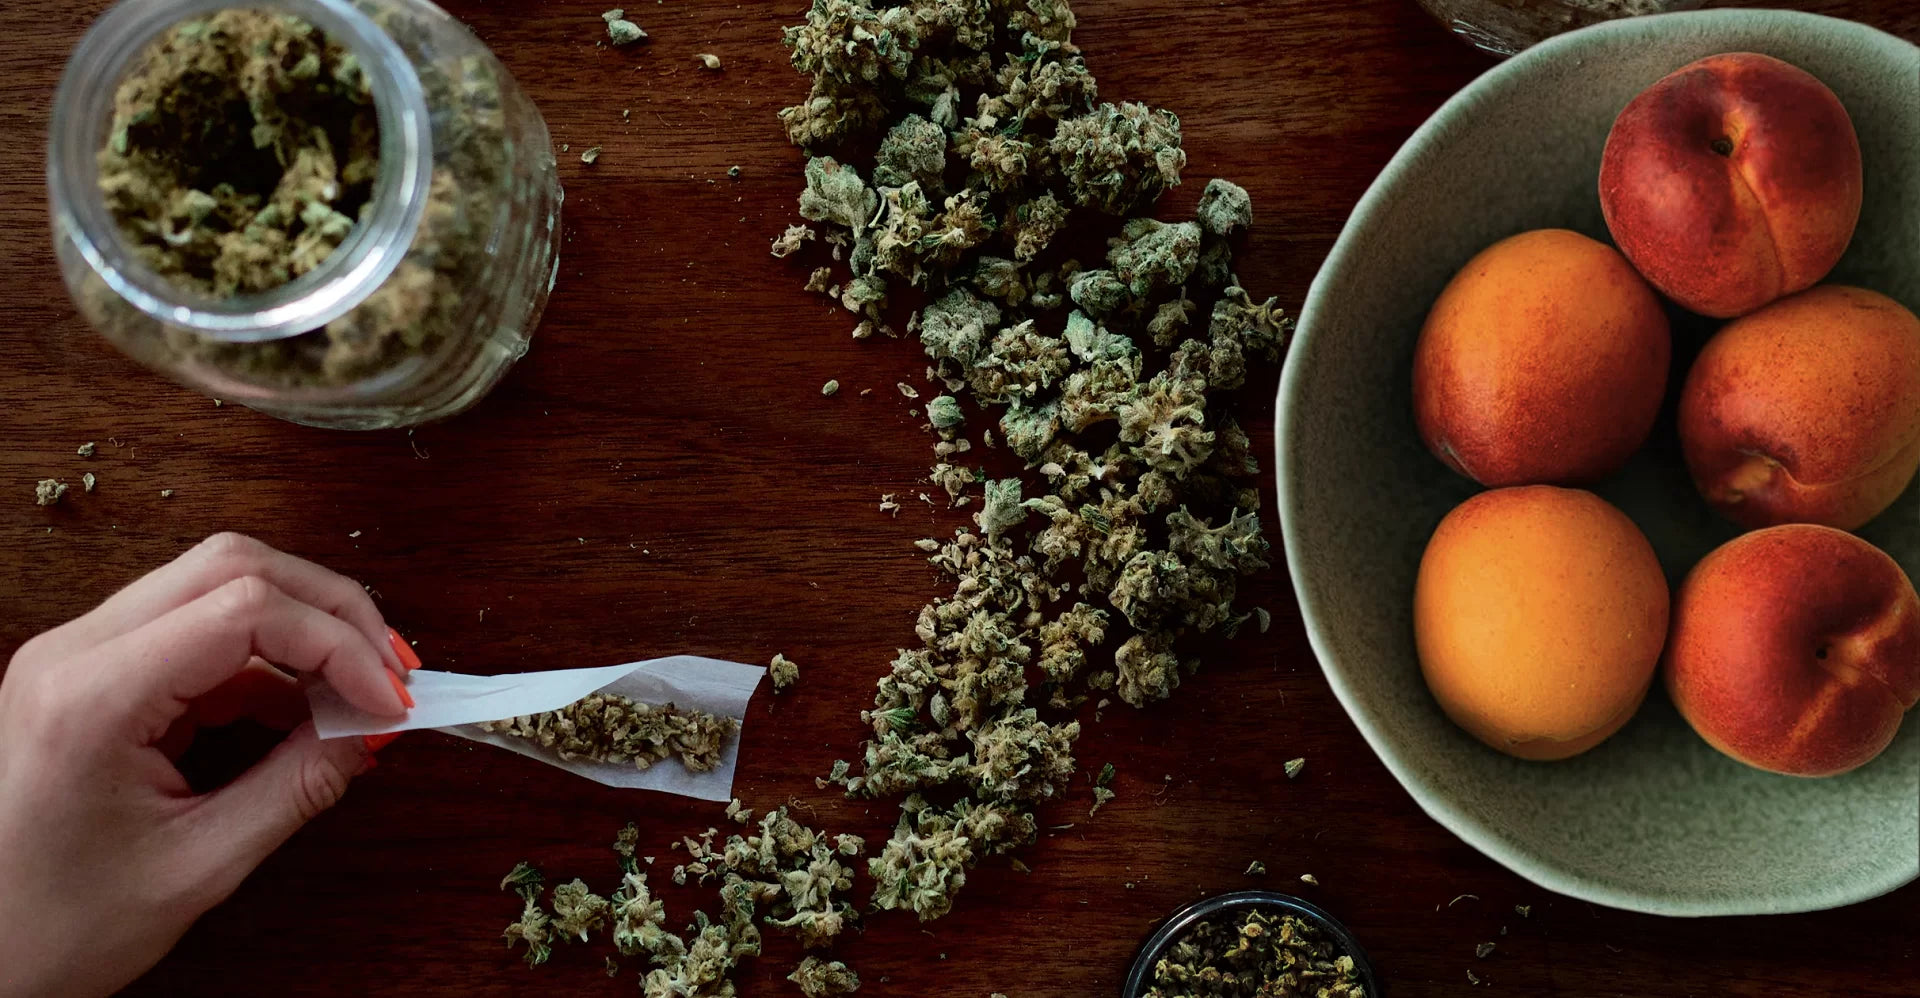 A pile of peach fuzz cannabis strain with a joint being rolled next to a bowl of peaches